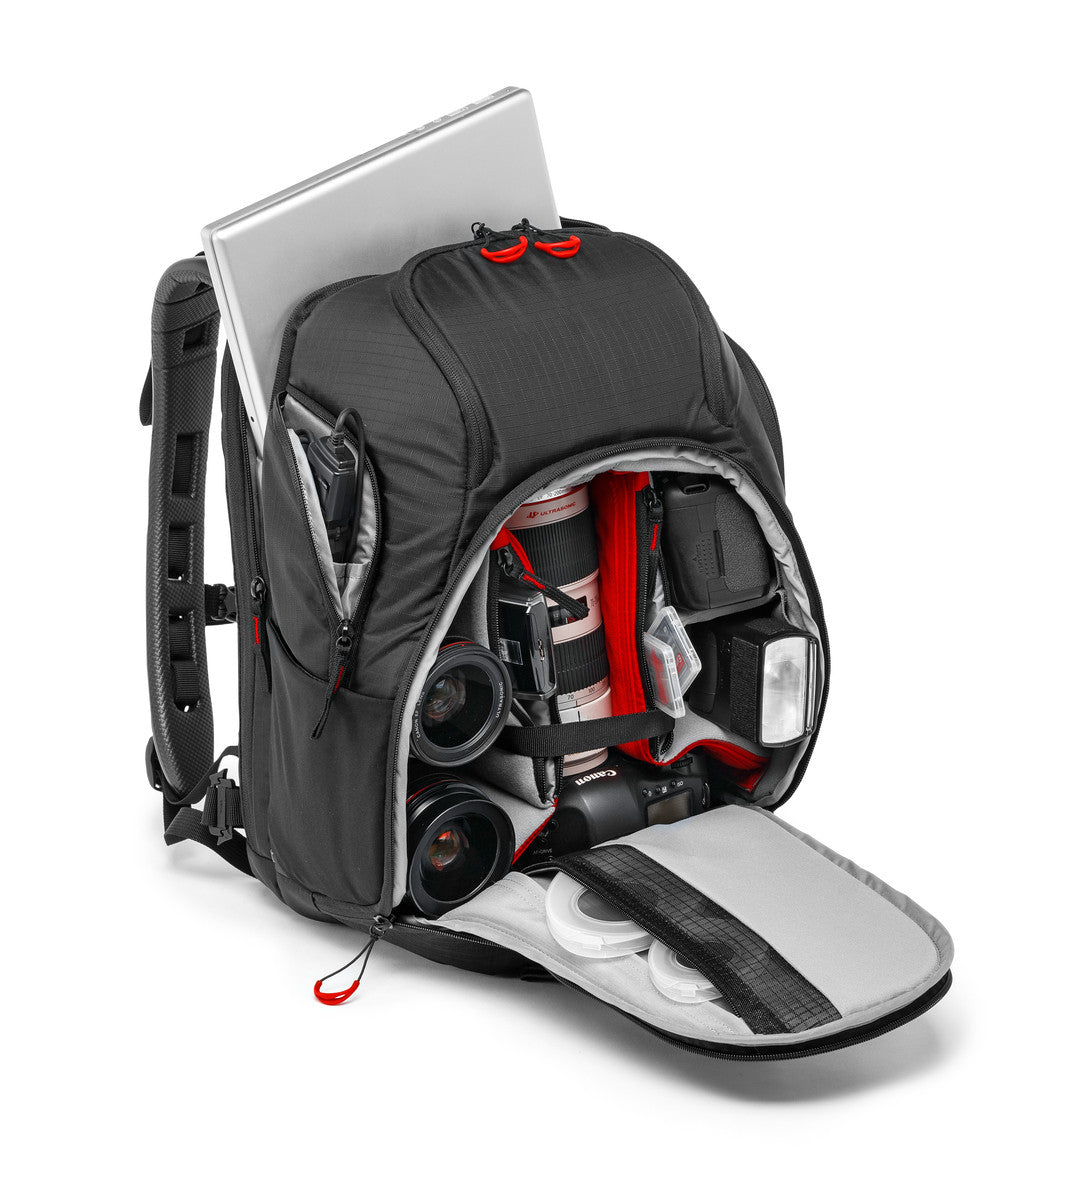 Manfrotto Multipro 120 Pro-Light Camera Backpack, bags backpacks, Manfrotto - Pictureline  - 3